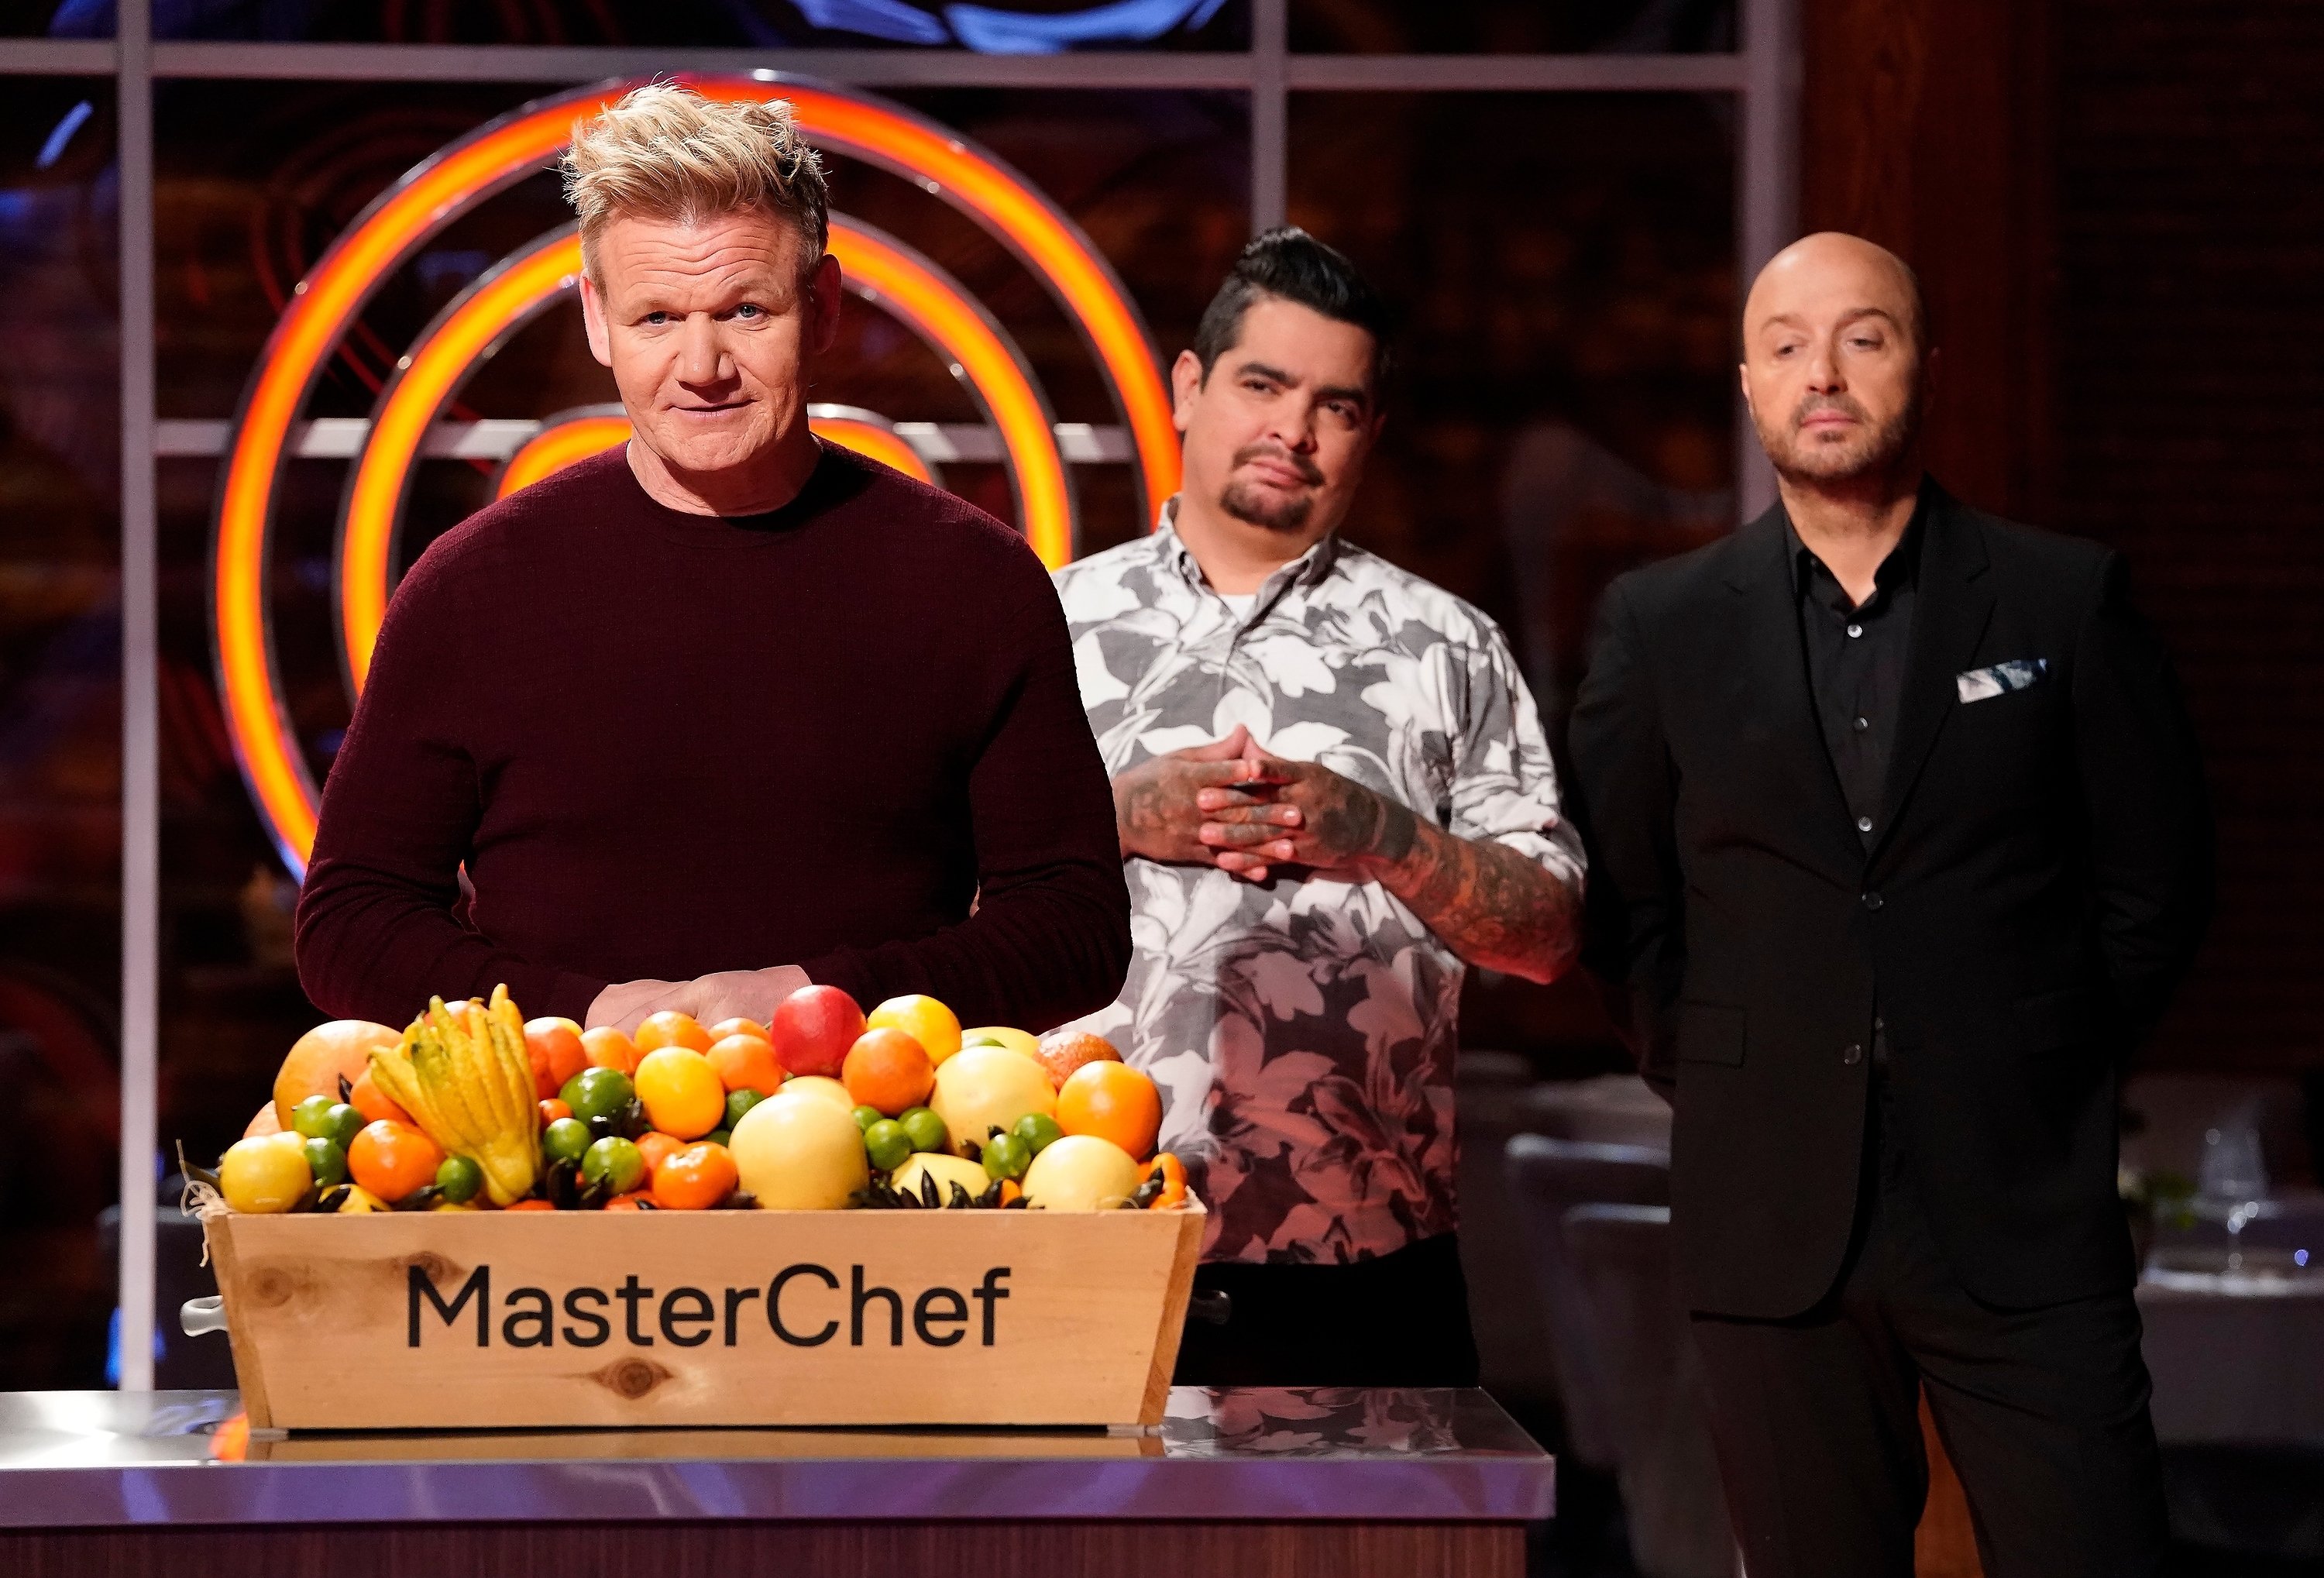 MasterChef Returns! Gordon Ramsay Welcomes a Lineup of Culinary Icons for Season 11